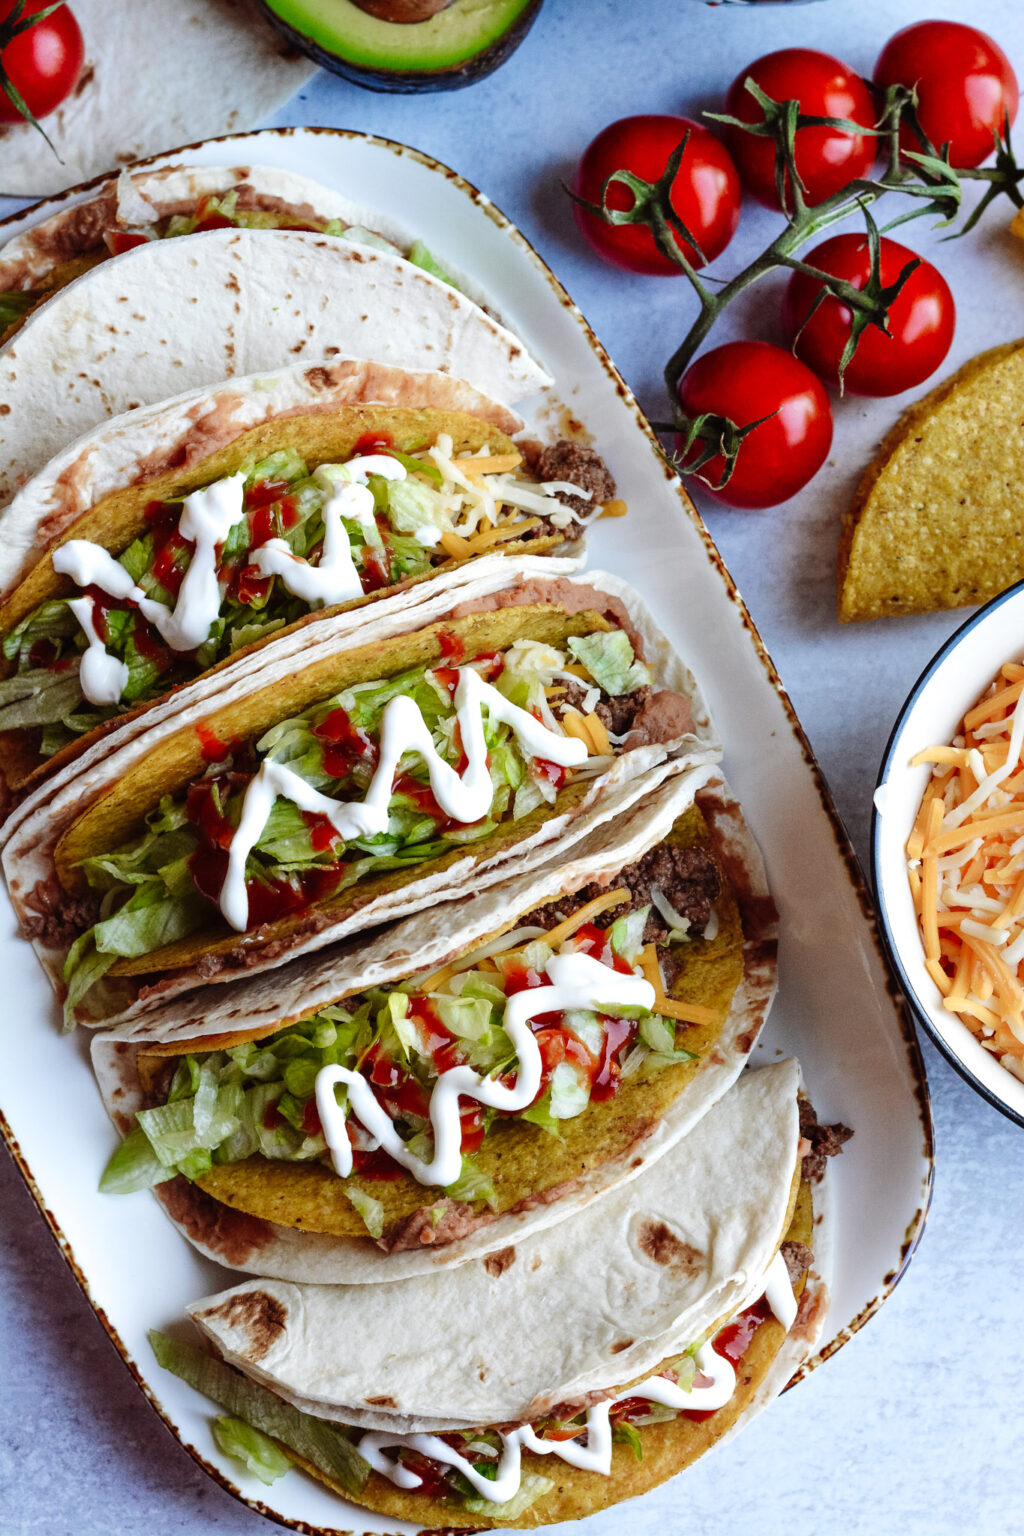 Double Decker Tacos | The Oven Light